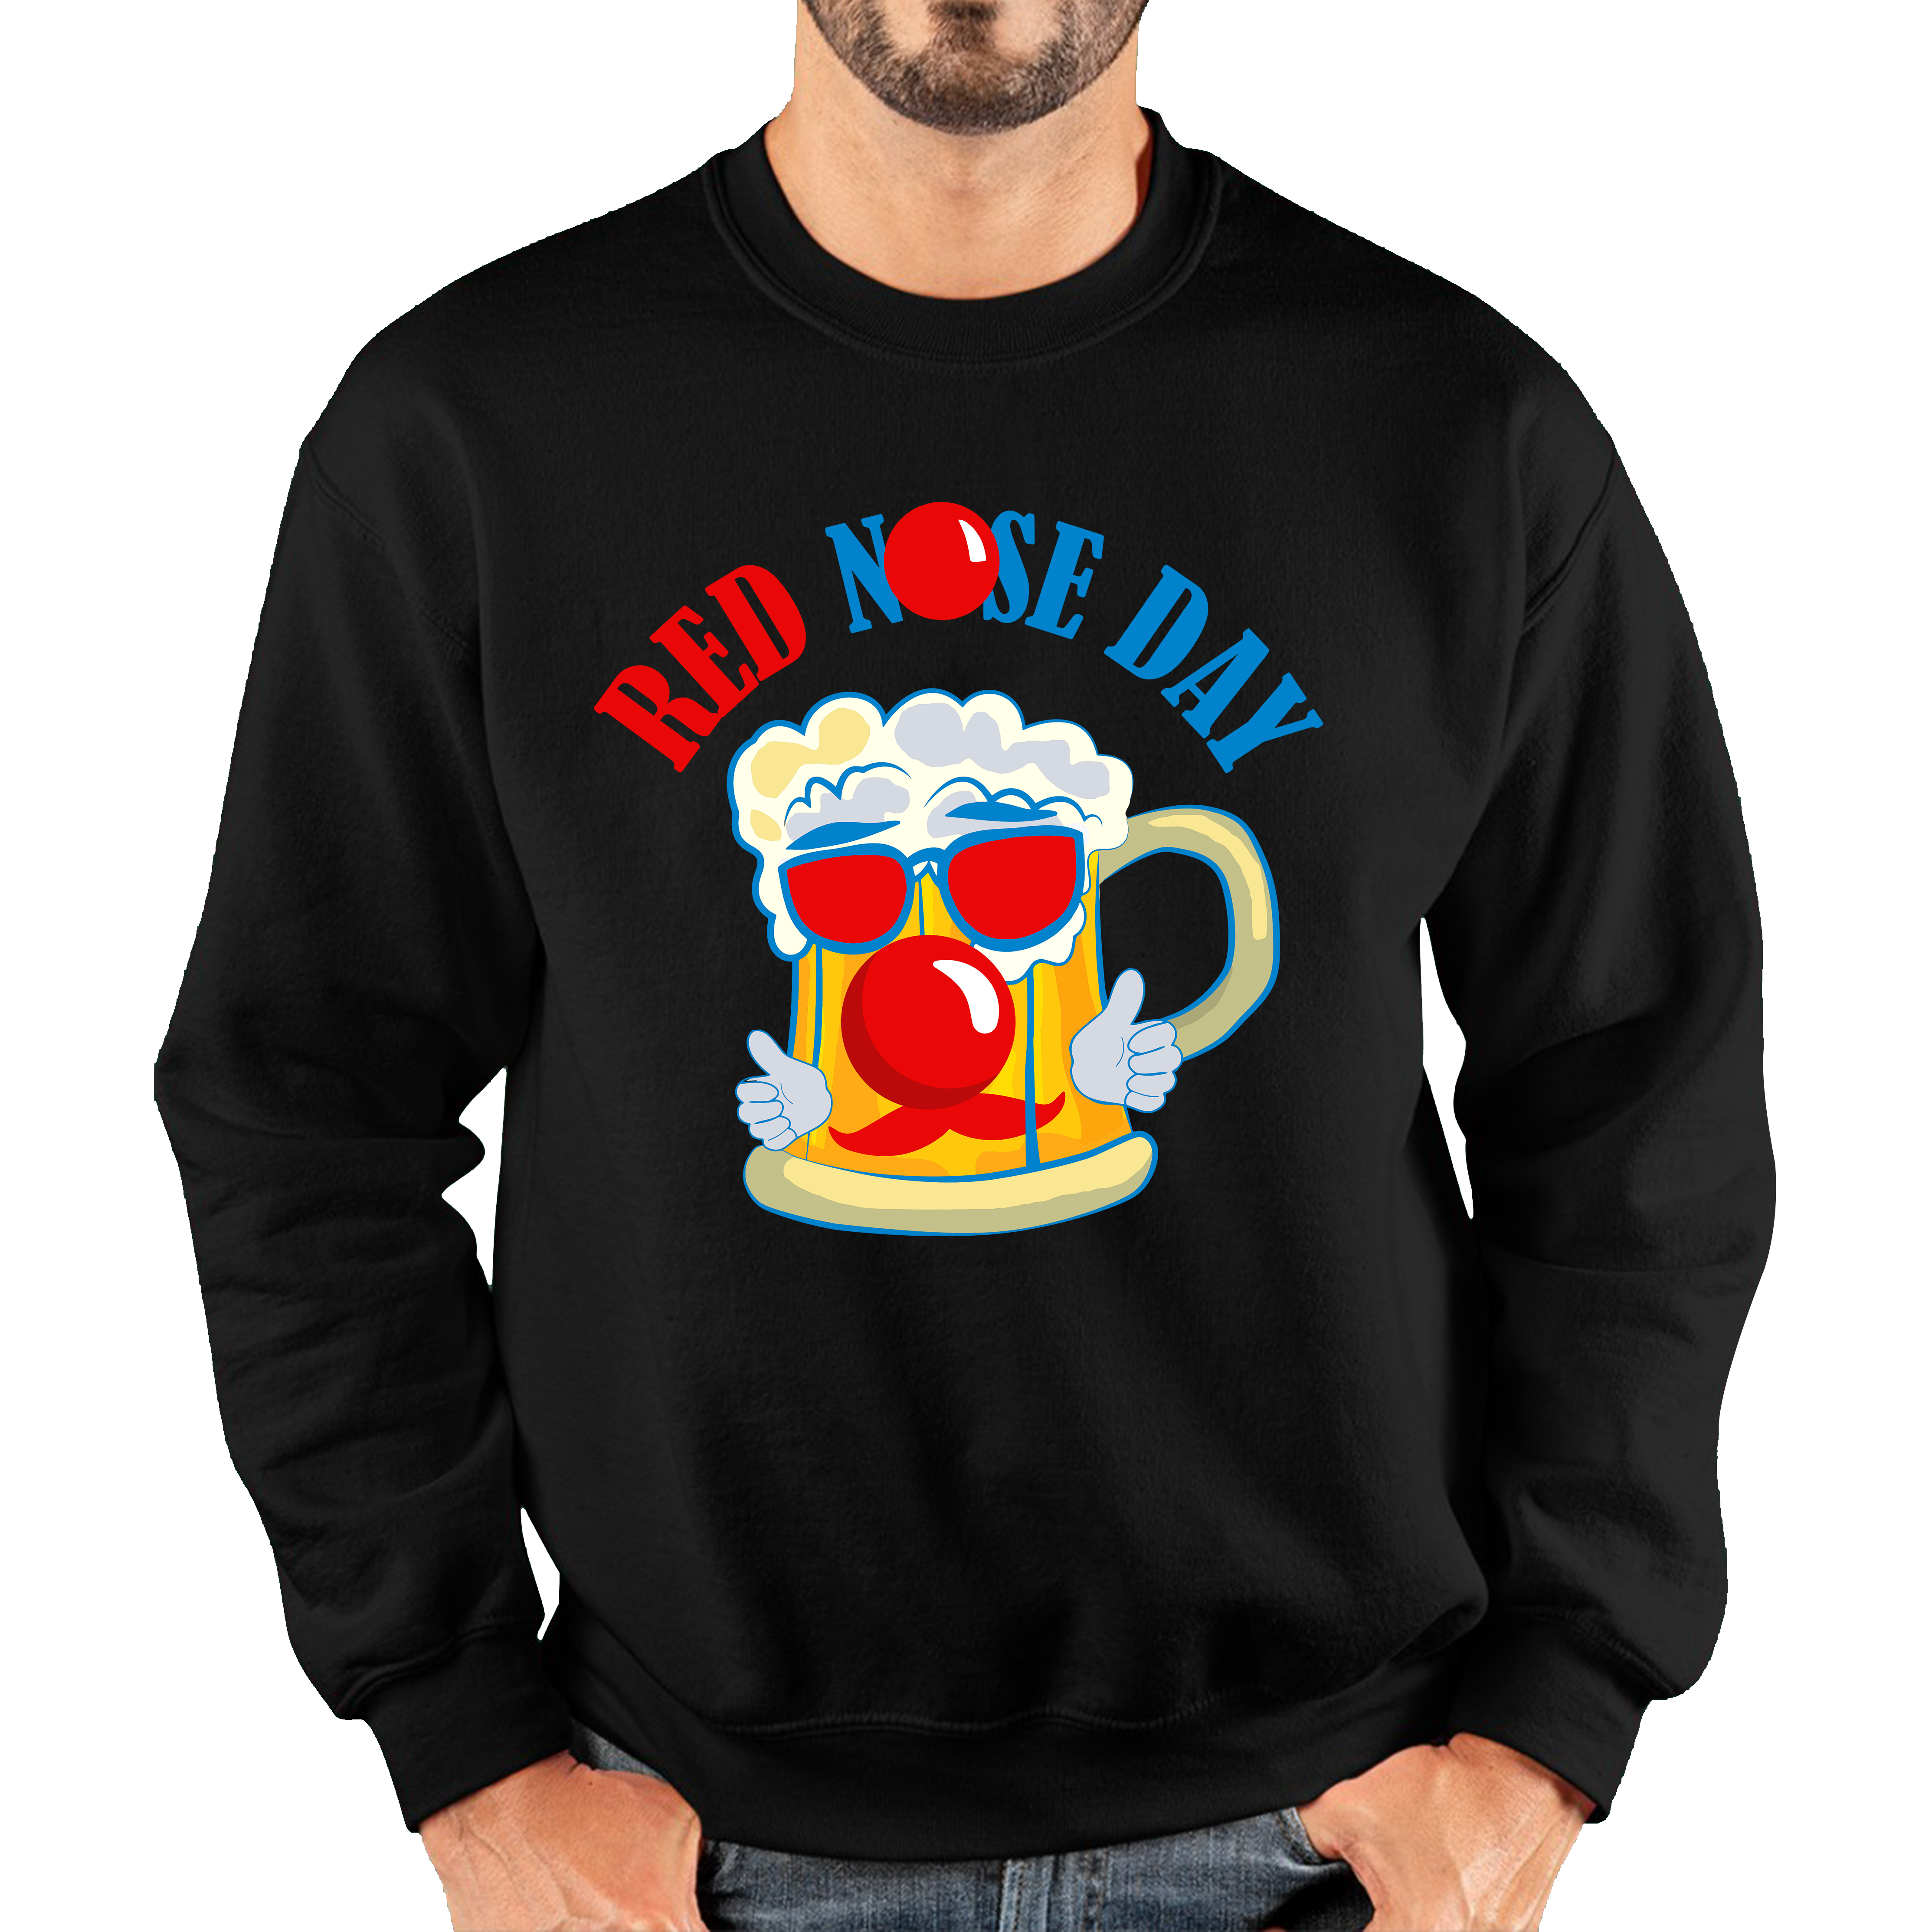 Beer Red Nose Day Funny Adult Sweatshirt. 50% Goes To Charity